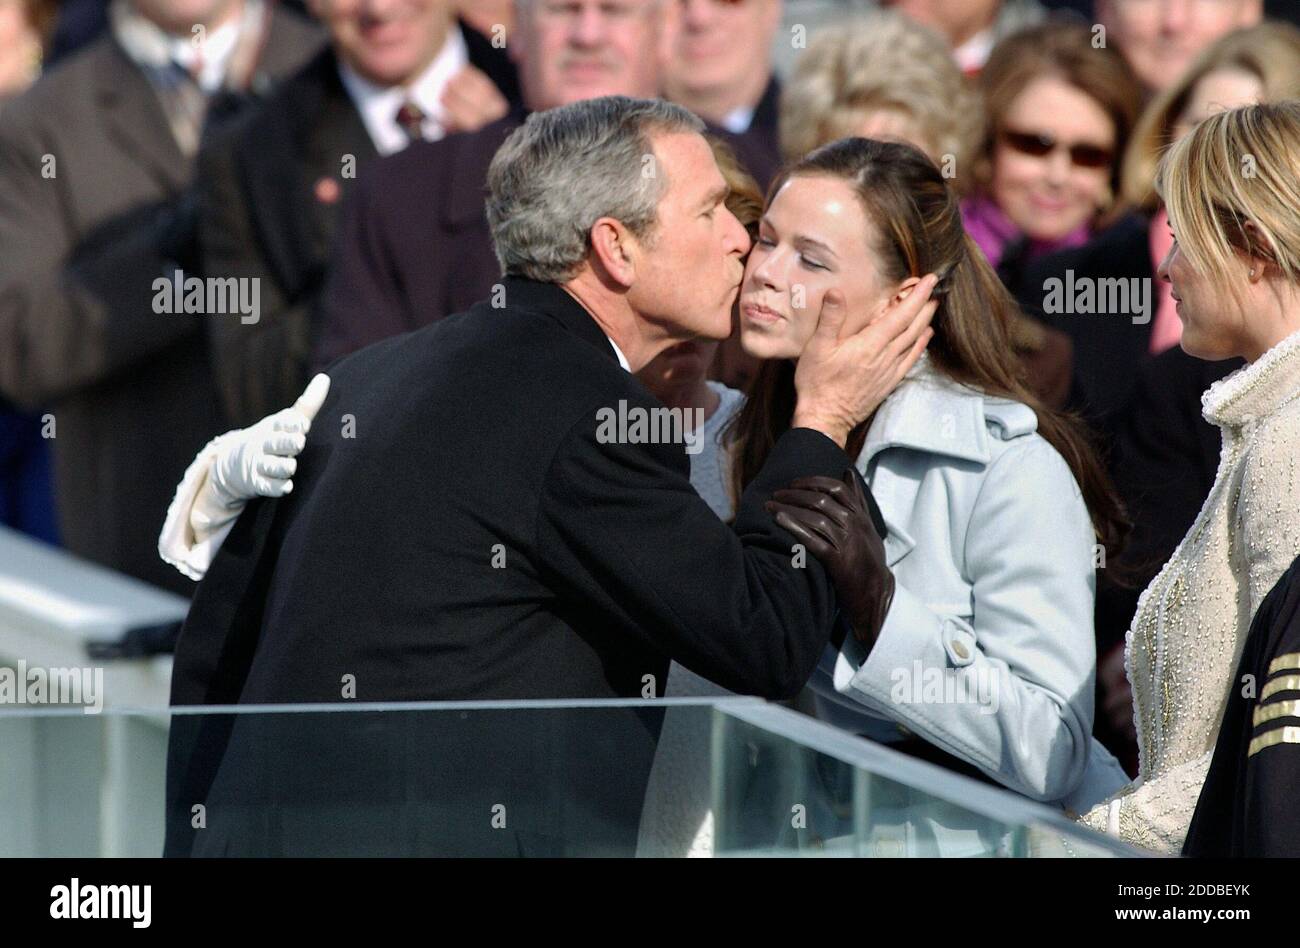 NO FILM, NO VIDEO, NO TV, NO DOCUMENTARY - President George W. Bush kisses daughter Barbara after being sworn in as U.S. President for a second term, in Washington, DC, USA, on January 20, 2005. Photo by Michael Bryant/US News Story Slugged/KRT/ABACA. Stock Photo